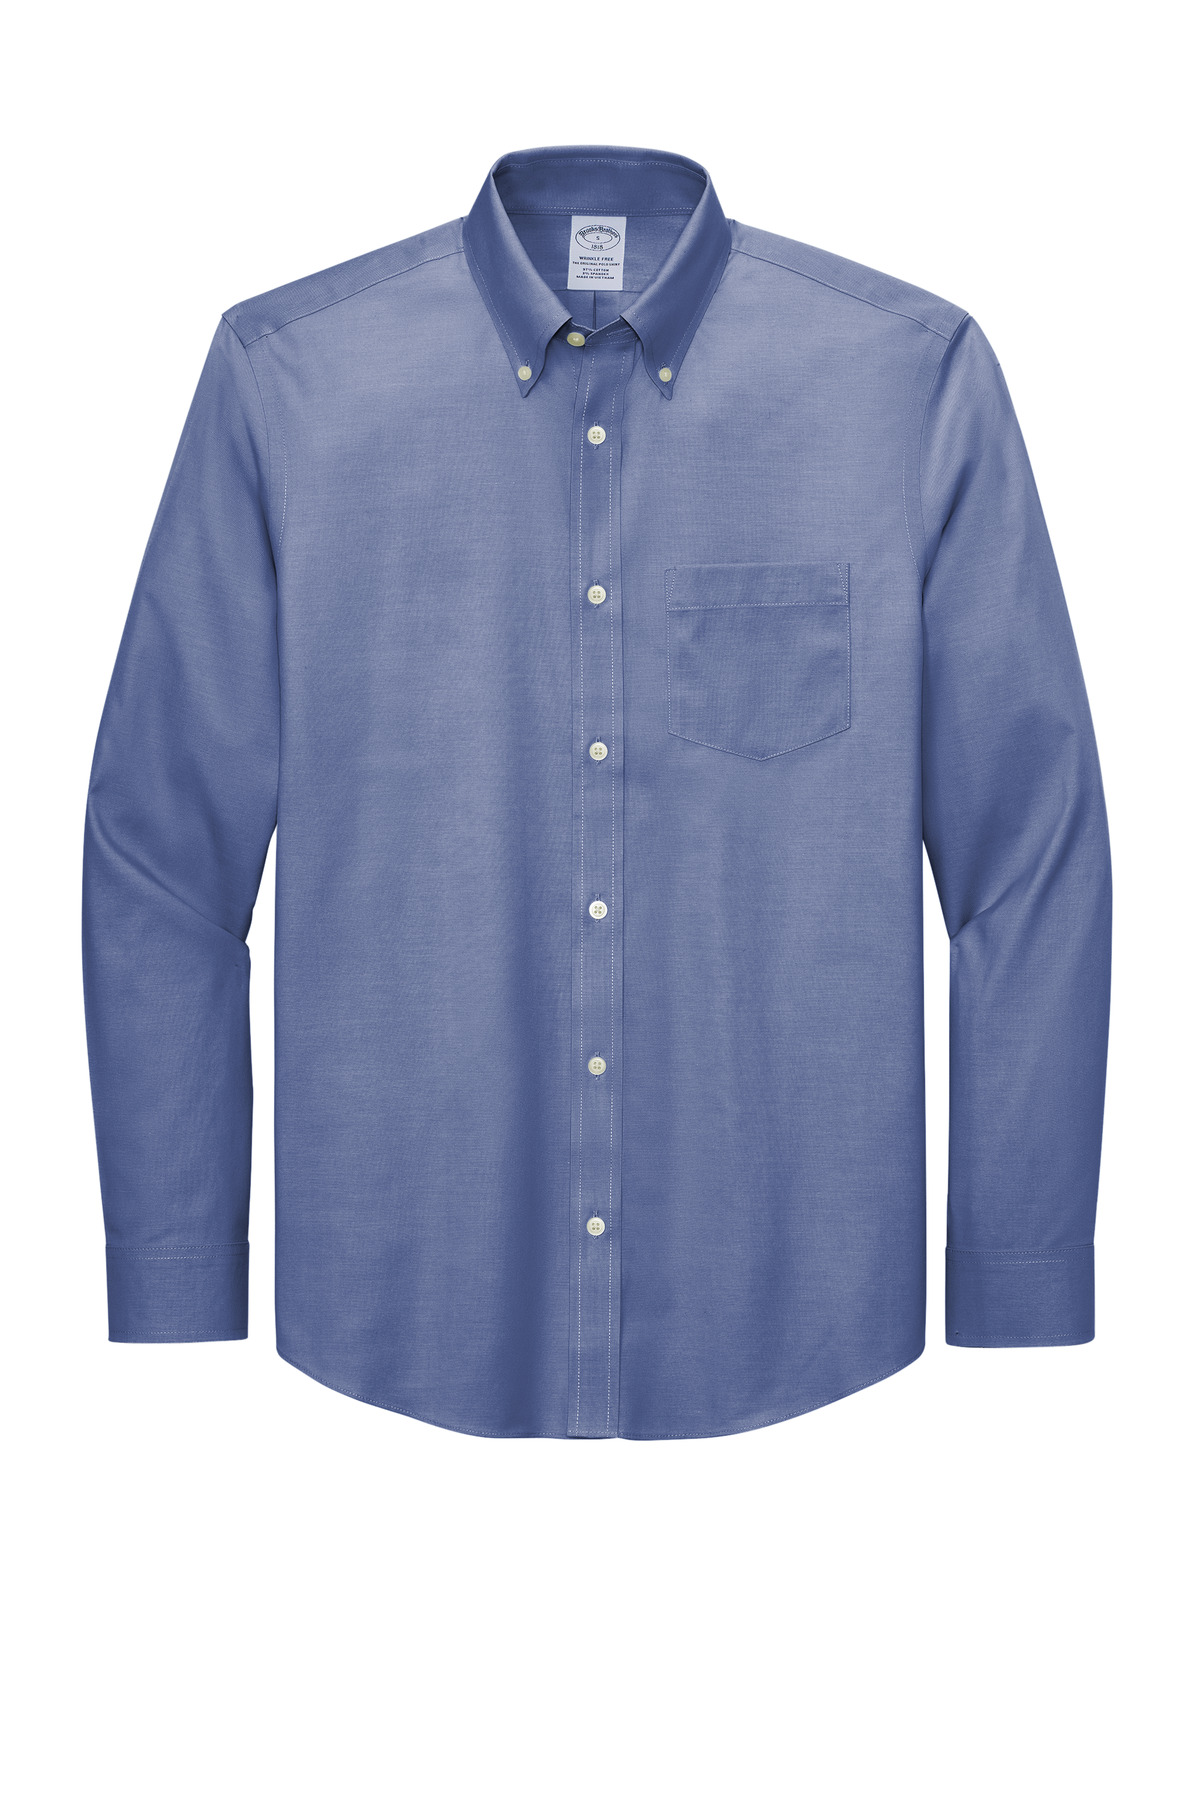 Brooks Brothers Wrinkle-Free Stretch Pinpoint Shirt BB18000